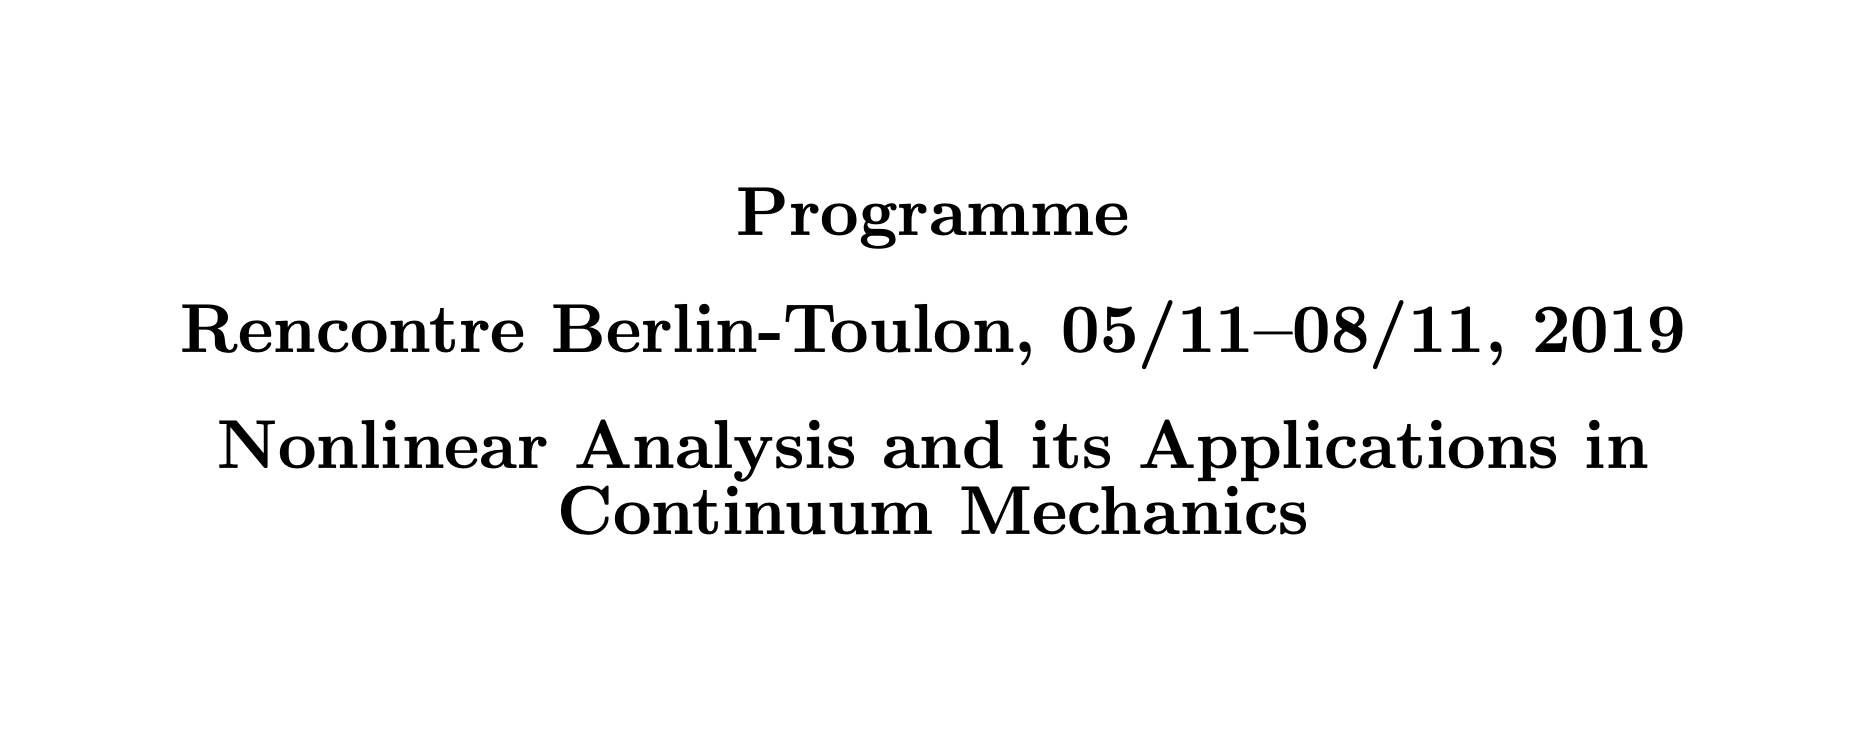 Workshop : Nonlinear Analysis and its Applications in the Continuum Mechanics